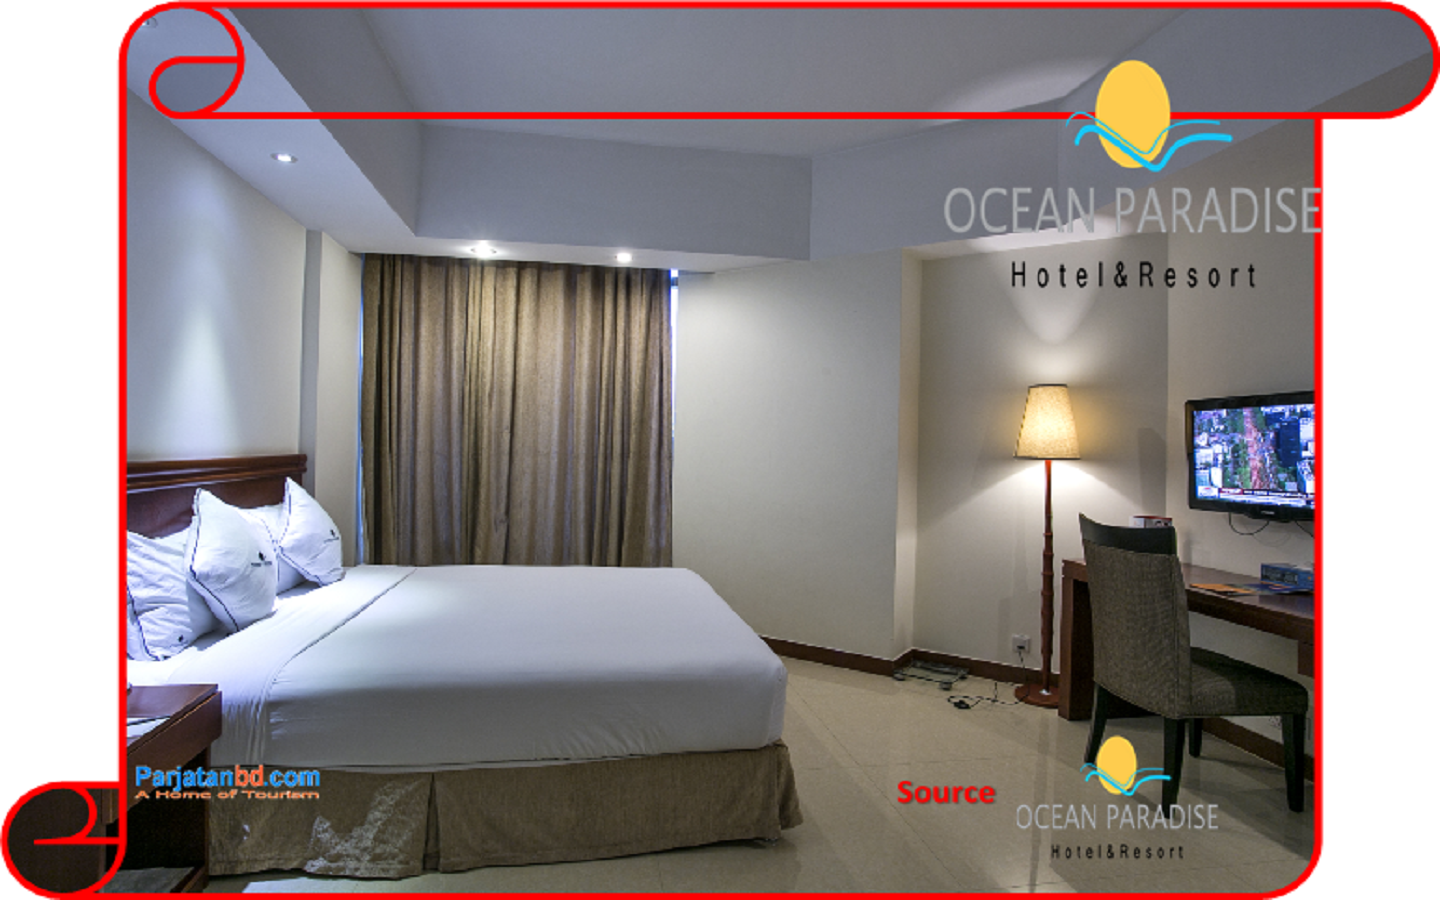 Room Executive Premier Deluxe With Balcony -1, Ocean Paradise Hotel